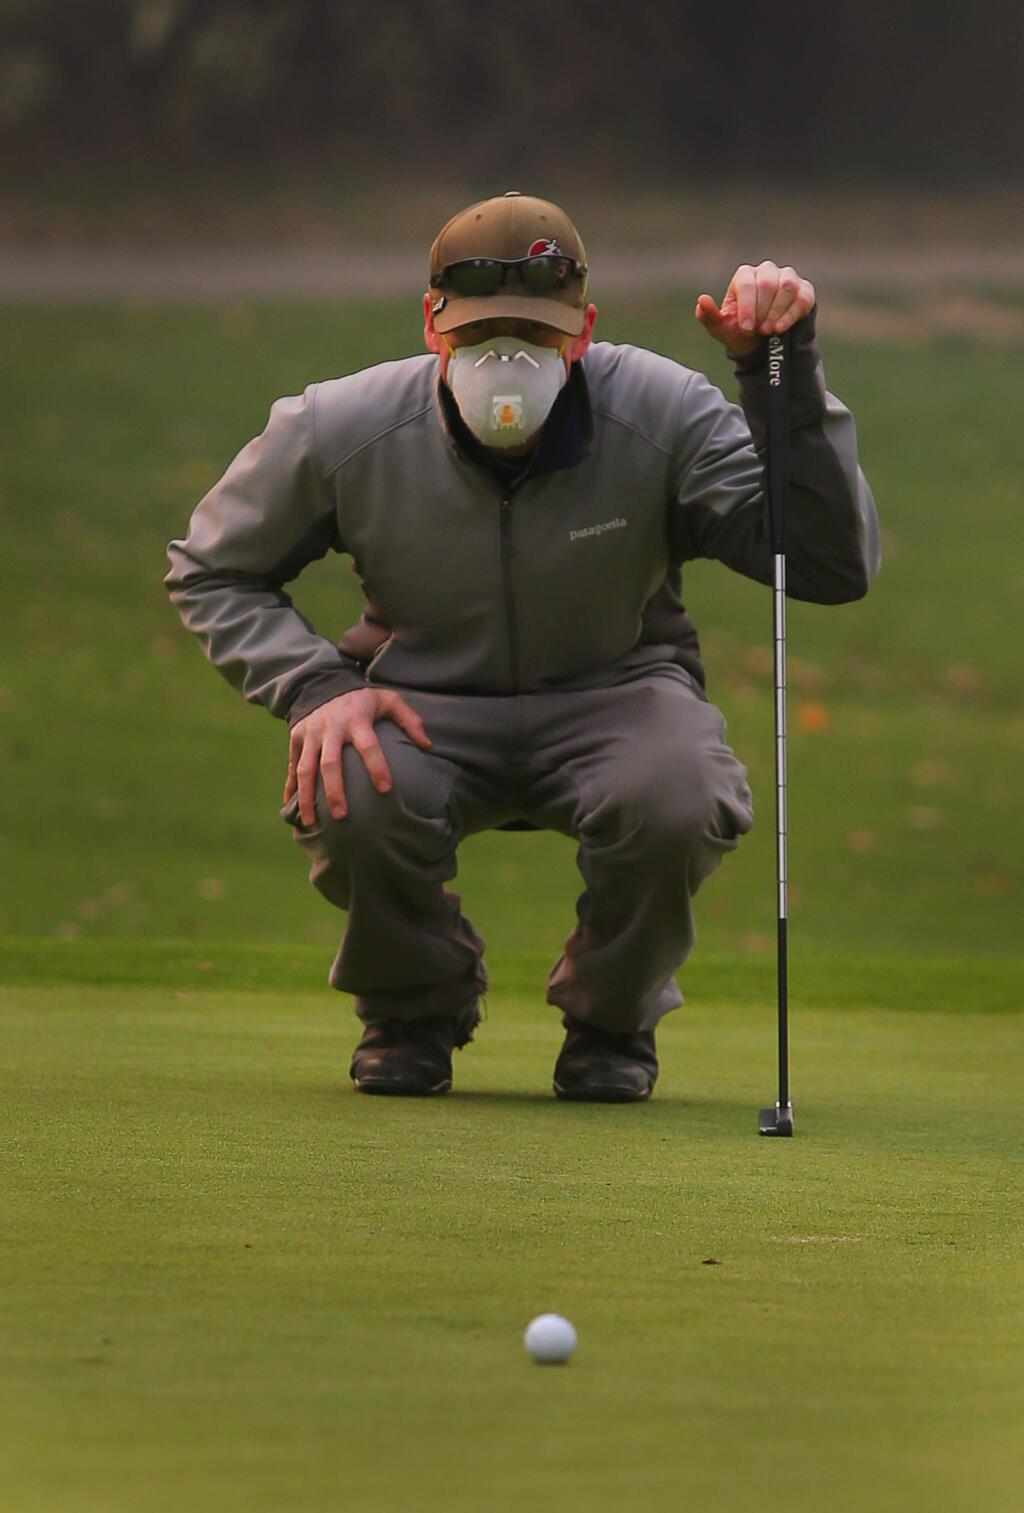 James McKenney, wearing a protective mask for the smoke, lines up his putt on the 9th hole of the Windsor Golf Club on Friday, Nov. 9, 2018. (CHRISTOPHER CHUNG/ PD)